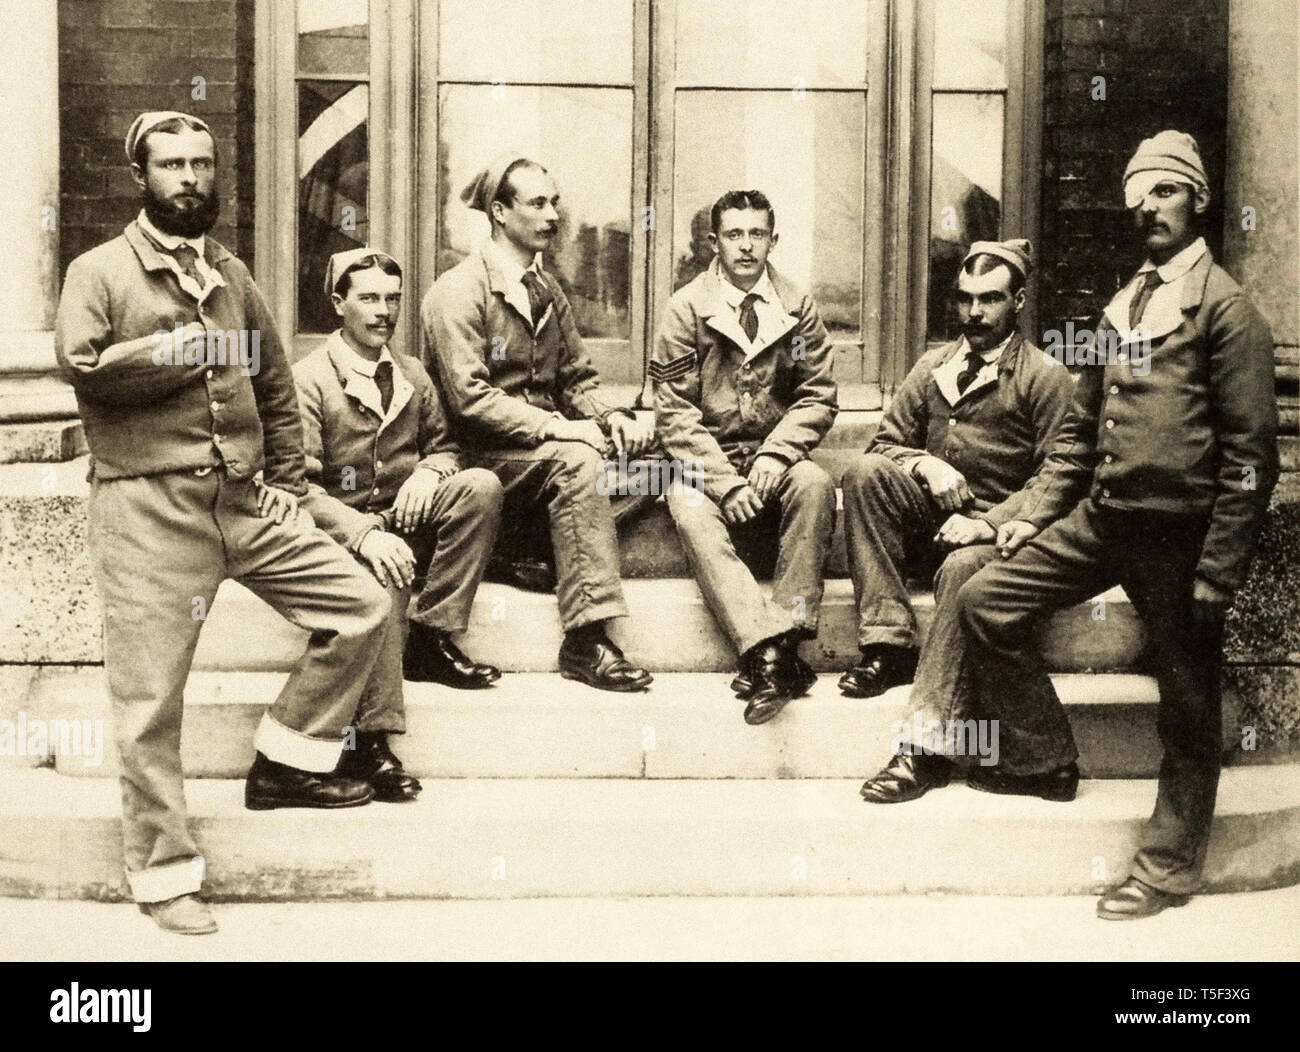 Mahdia War ( 1881-1899) - Injured During the Gordon Relief Campaign - from left to right Private Clarks (Scottish Guard), Private Austin (5th Lancers), Private Steele 4th Dragons Guards), Sergeant Fook (20th Hussars) Private wagg (1st Royal Dragoons), Corporal Bower (1st Coldstream Guards ), Netley May 16th 1885 Stock Photo